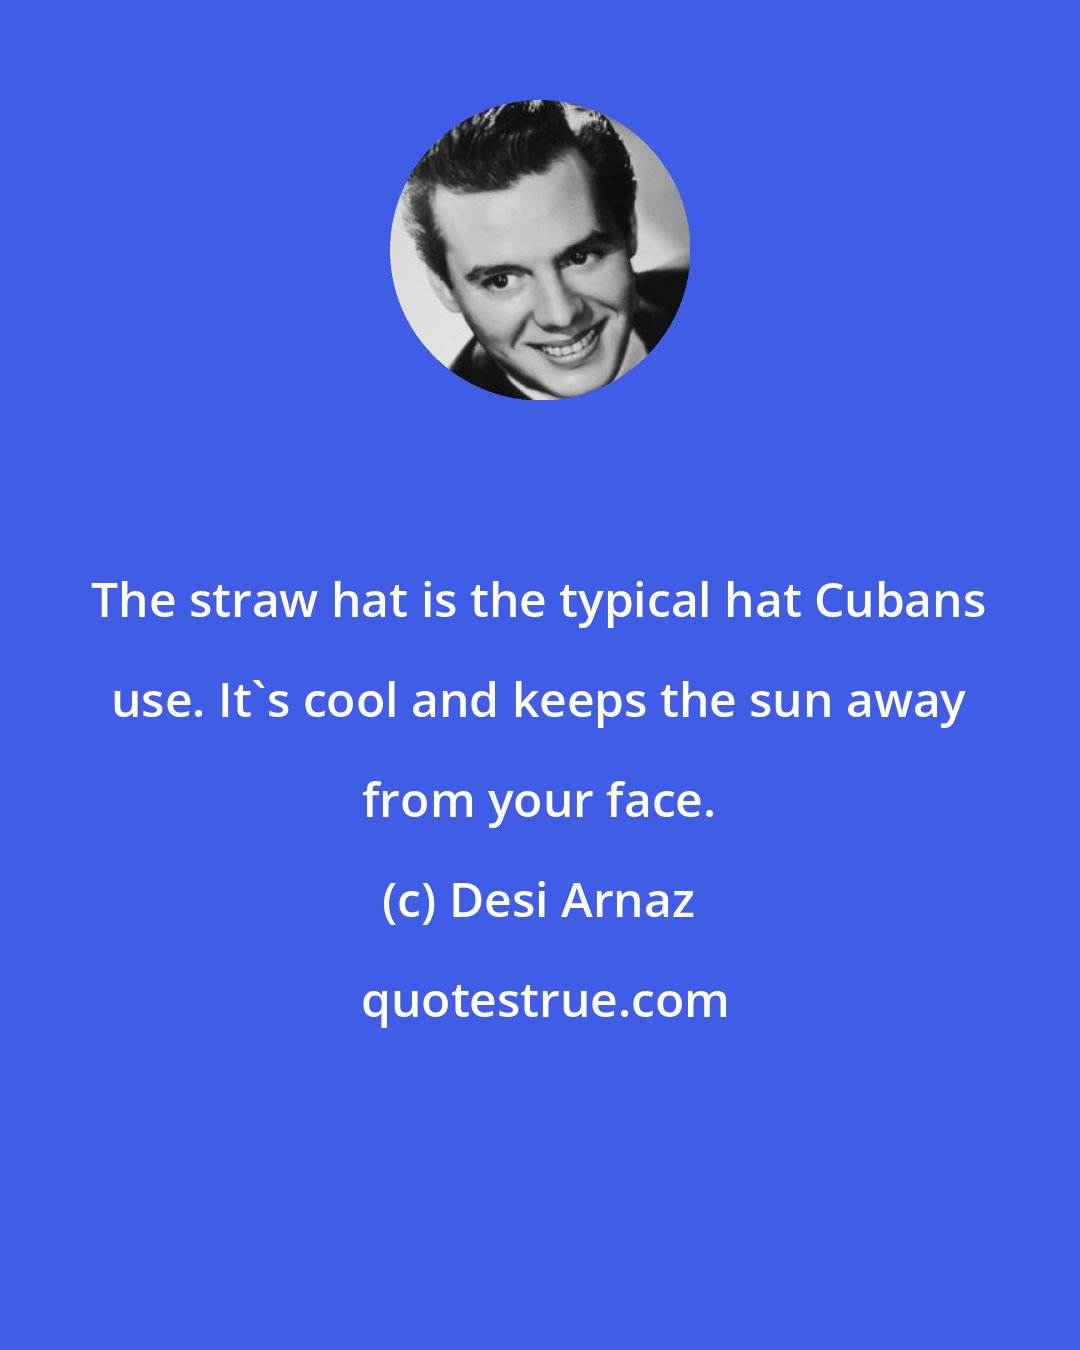 Desi Arnaz: The straw hat is the typical hat Cubans use. It's cool and keeps the sun away from your face.